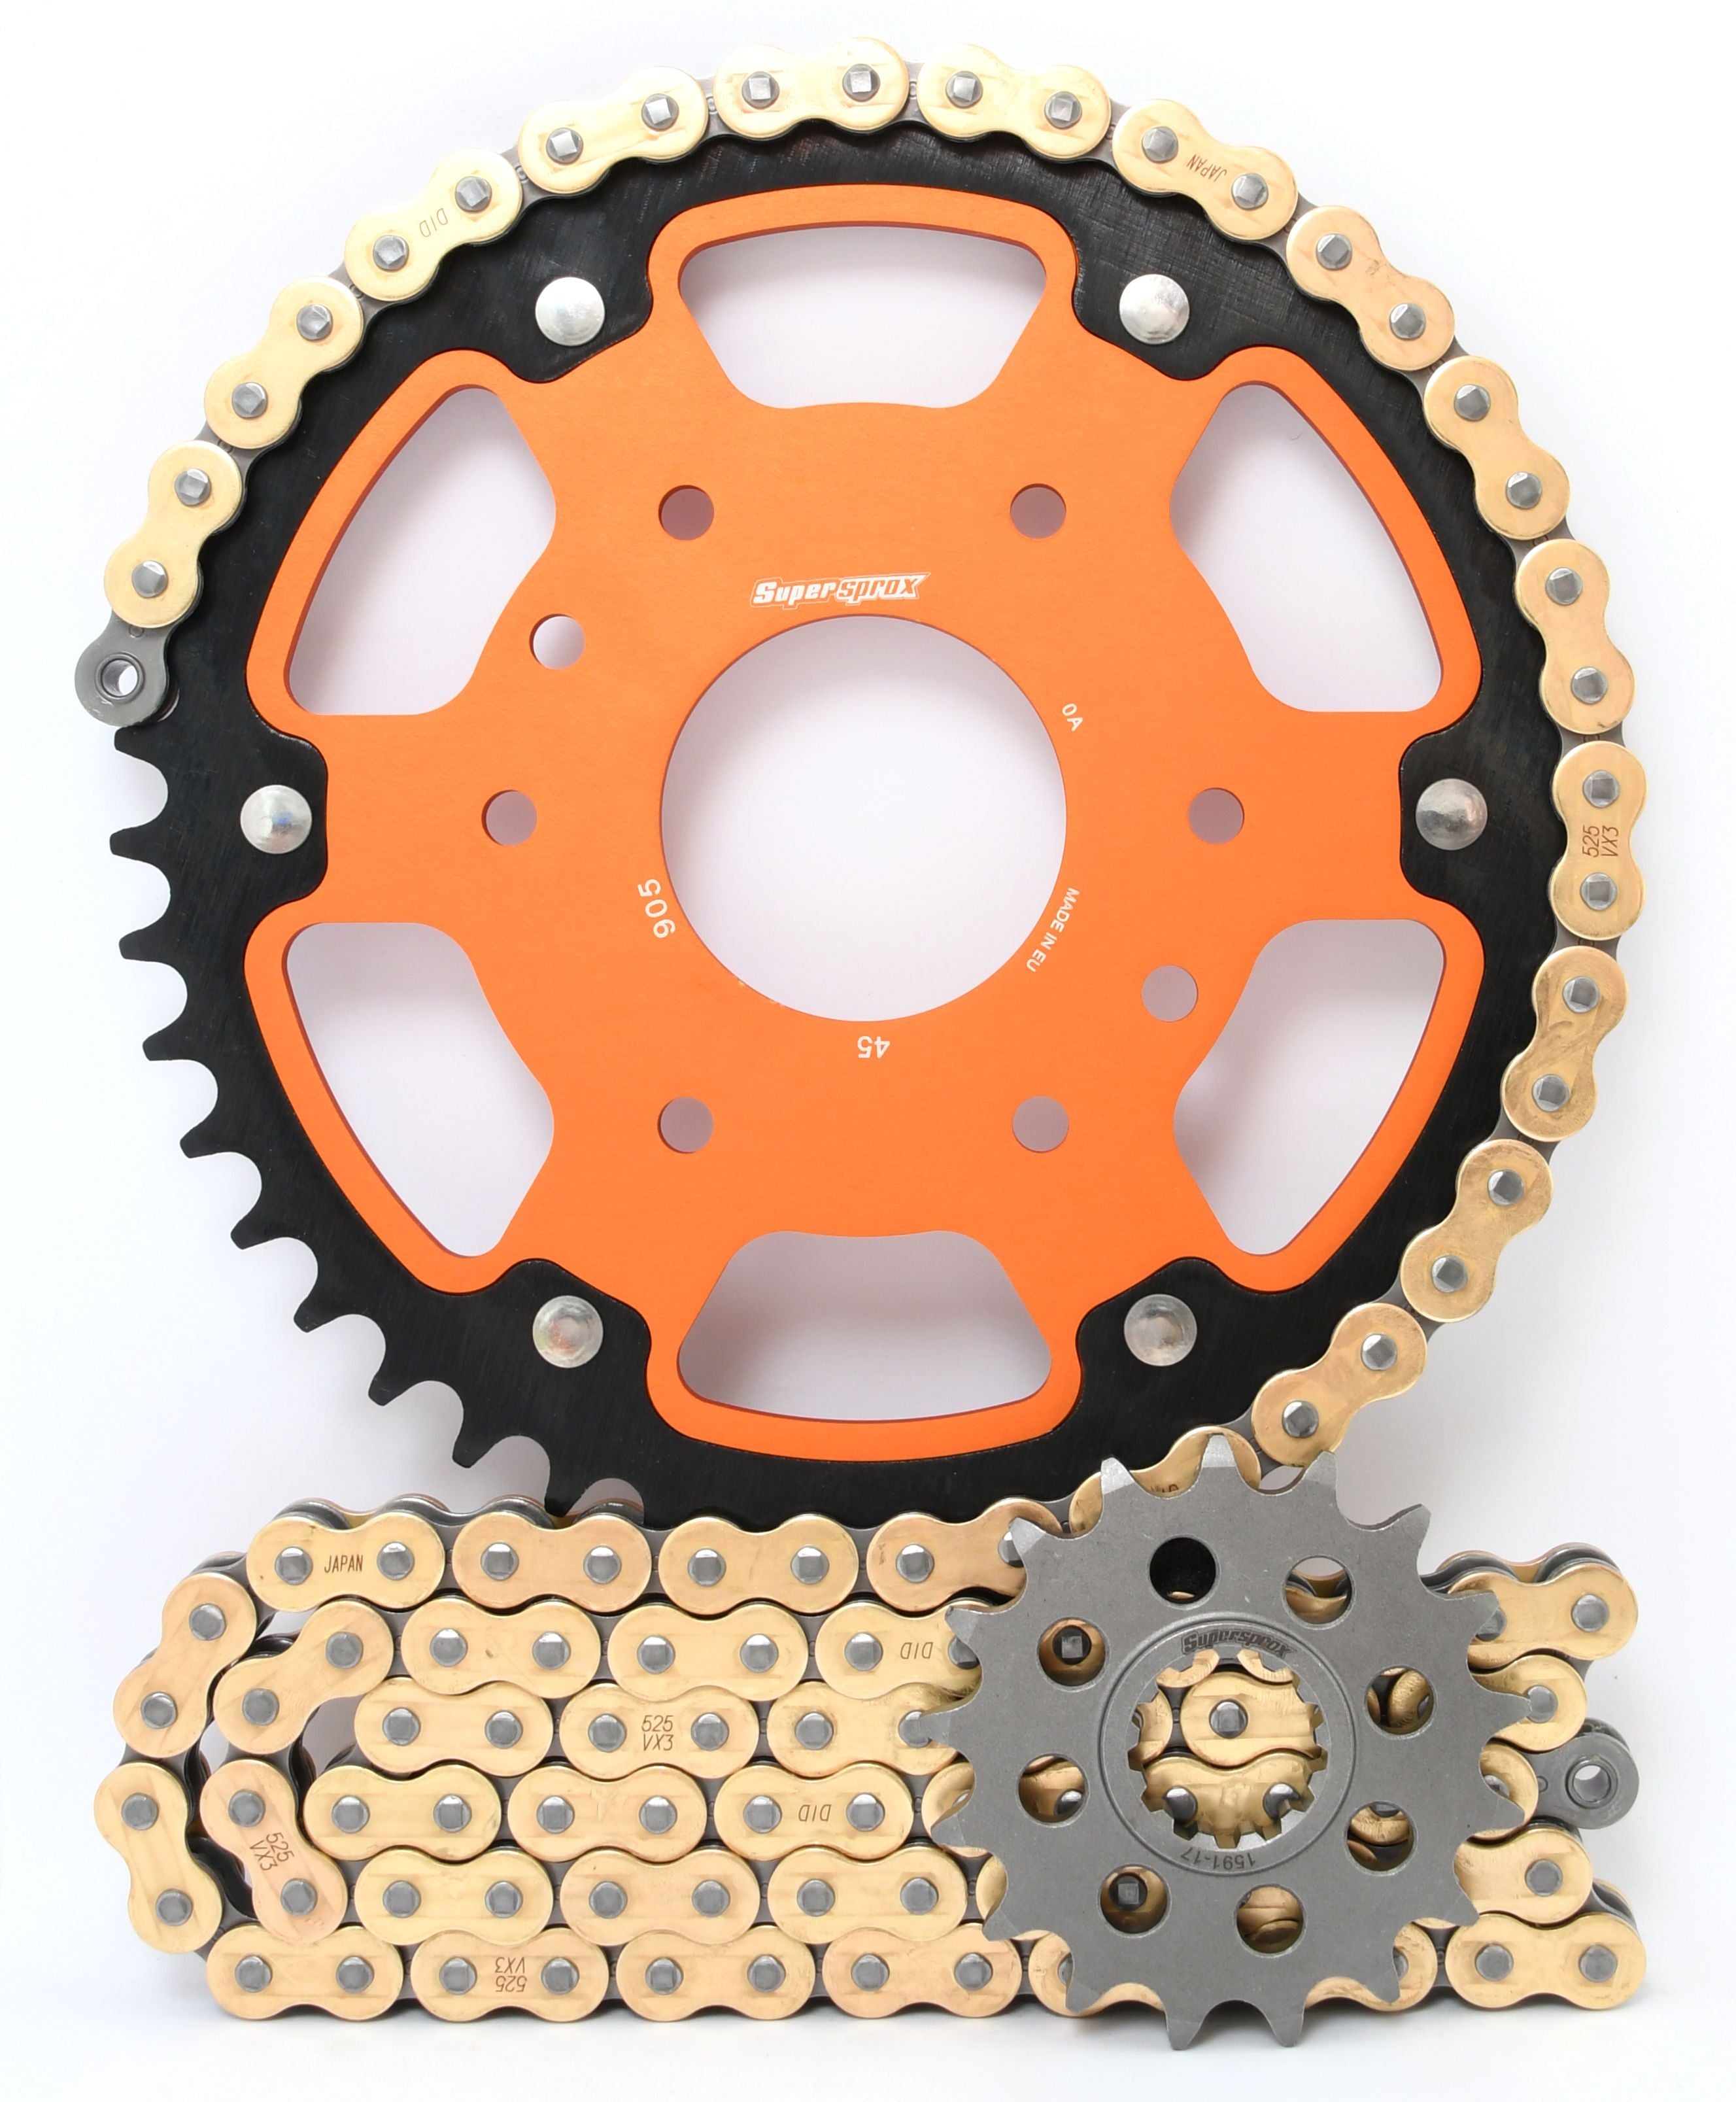 Supersprox Chain & Sprocket Kit for KTM 125 RC and Duke - Standard Gearing